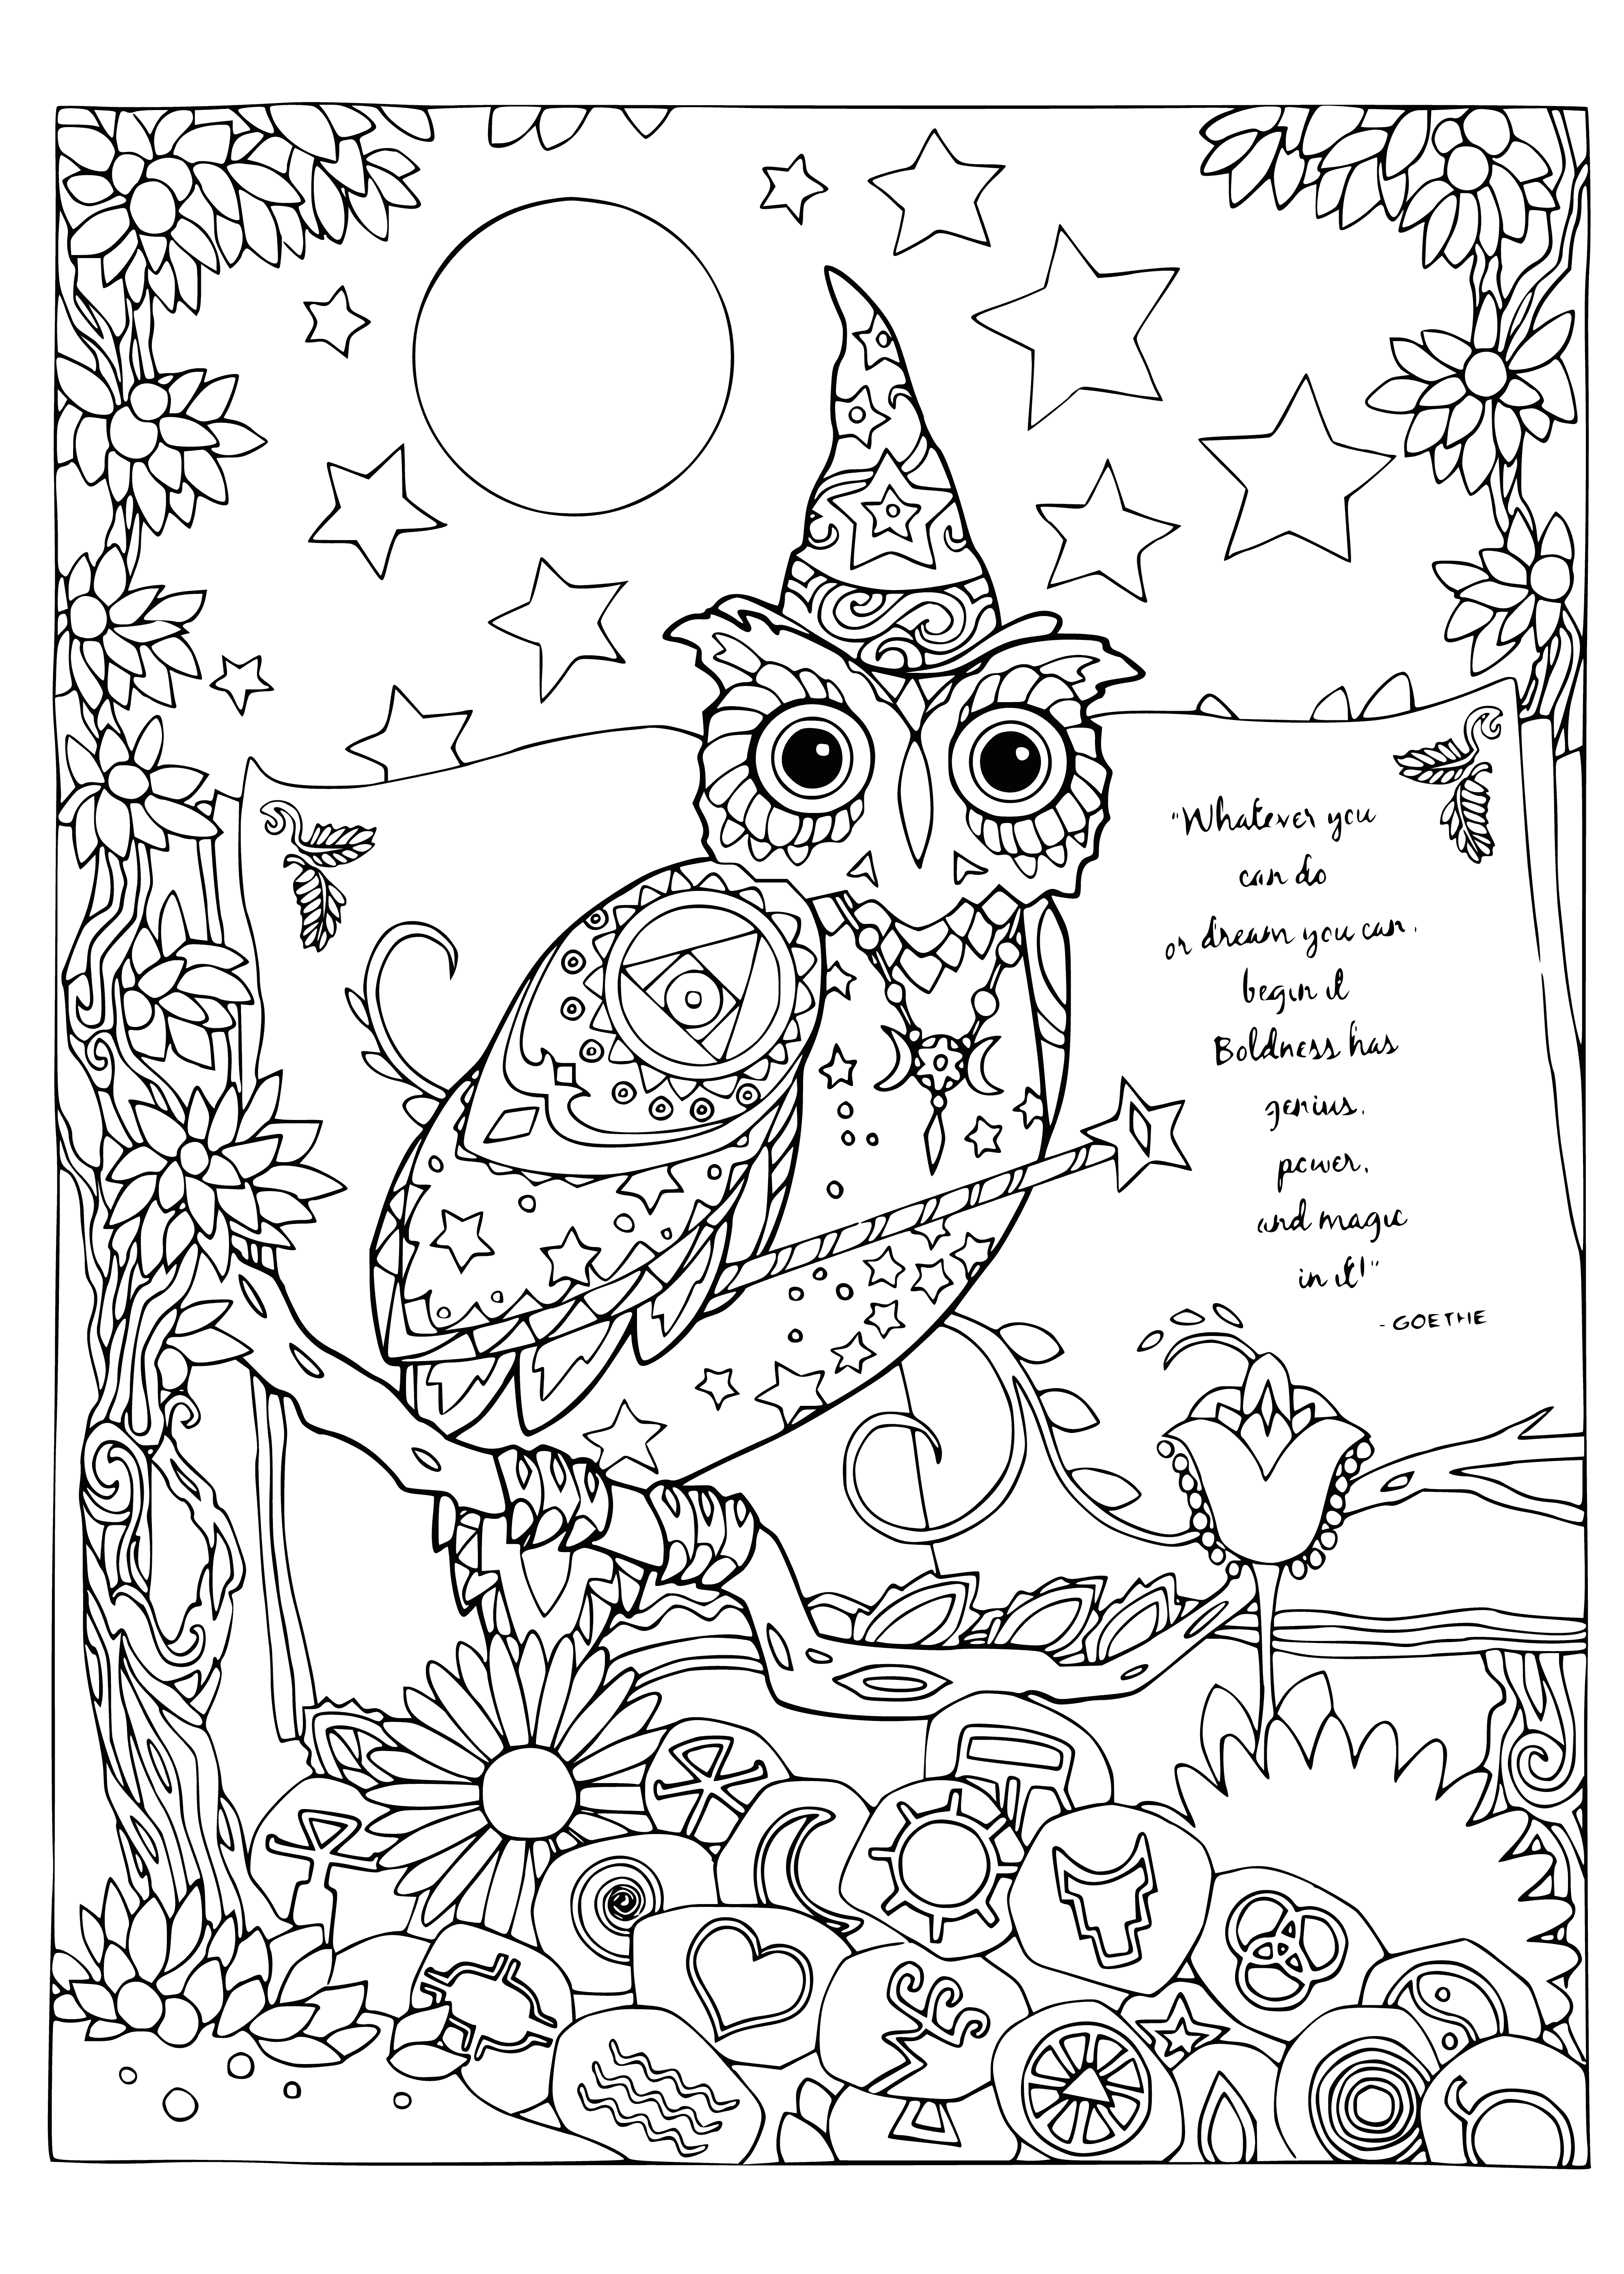 coloring page: A large owl sits atop a stack of books with a wand in its claws, featuring a curved beak, big eyes, and various feather shades.